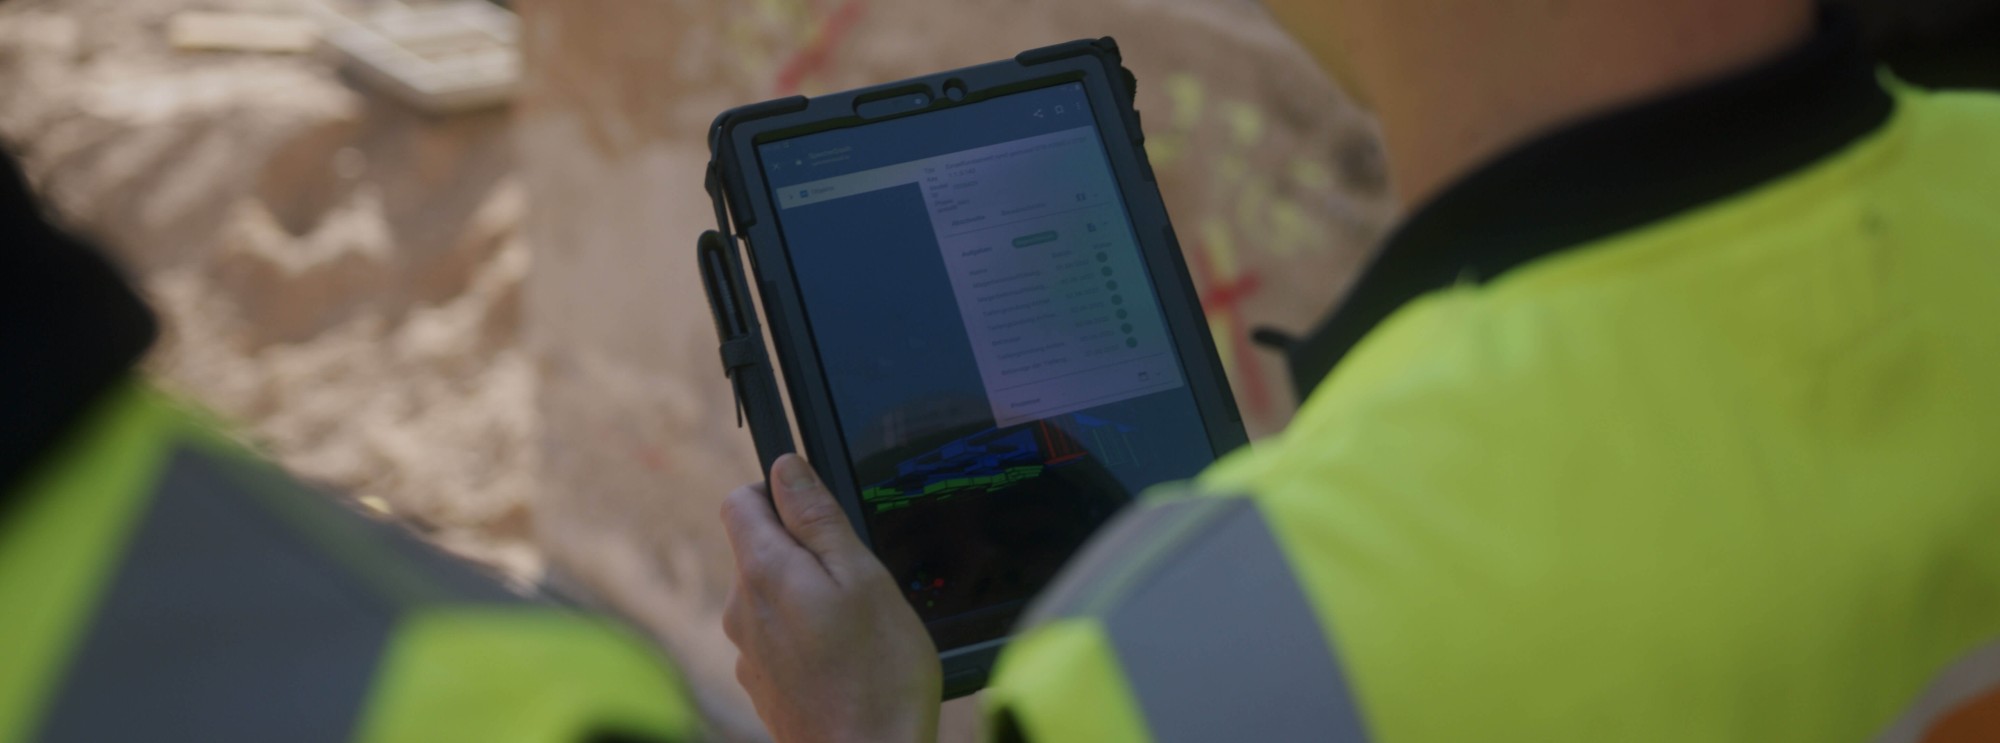 An Ipad on the construction site using specter